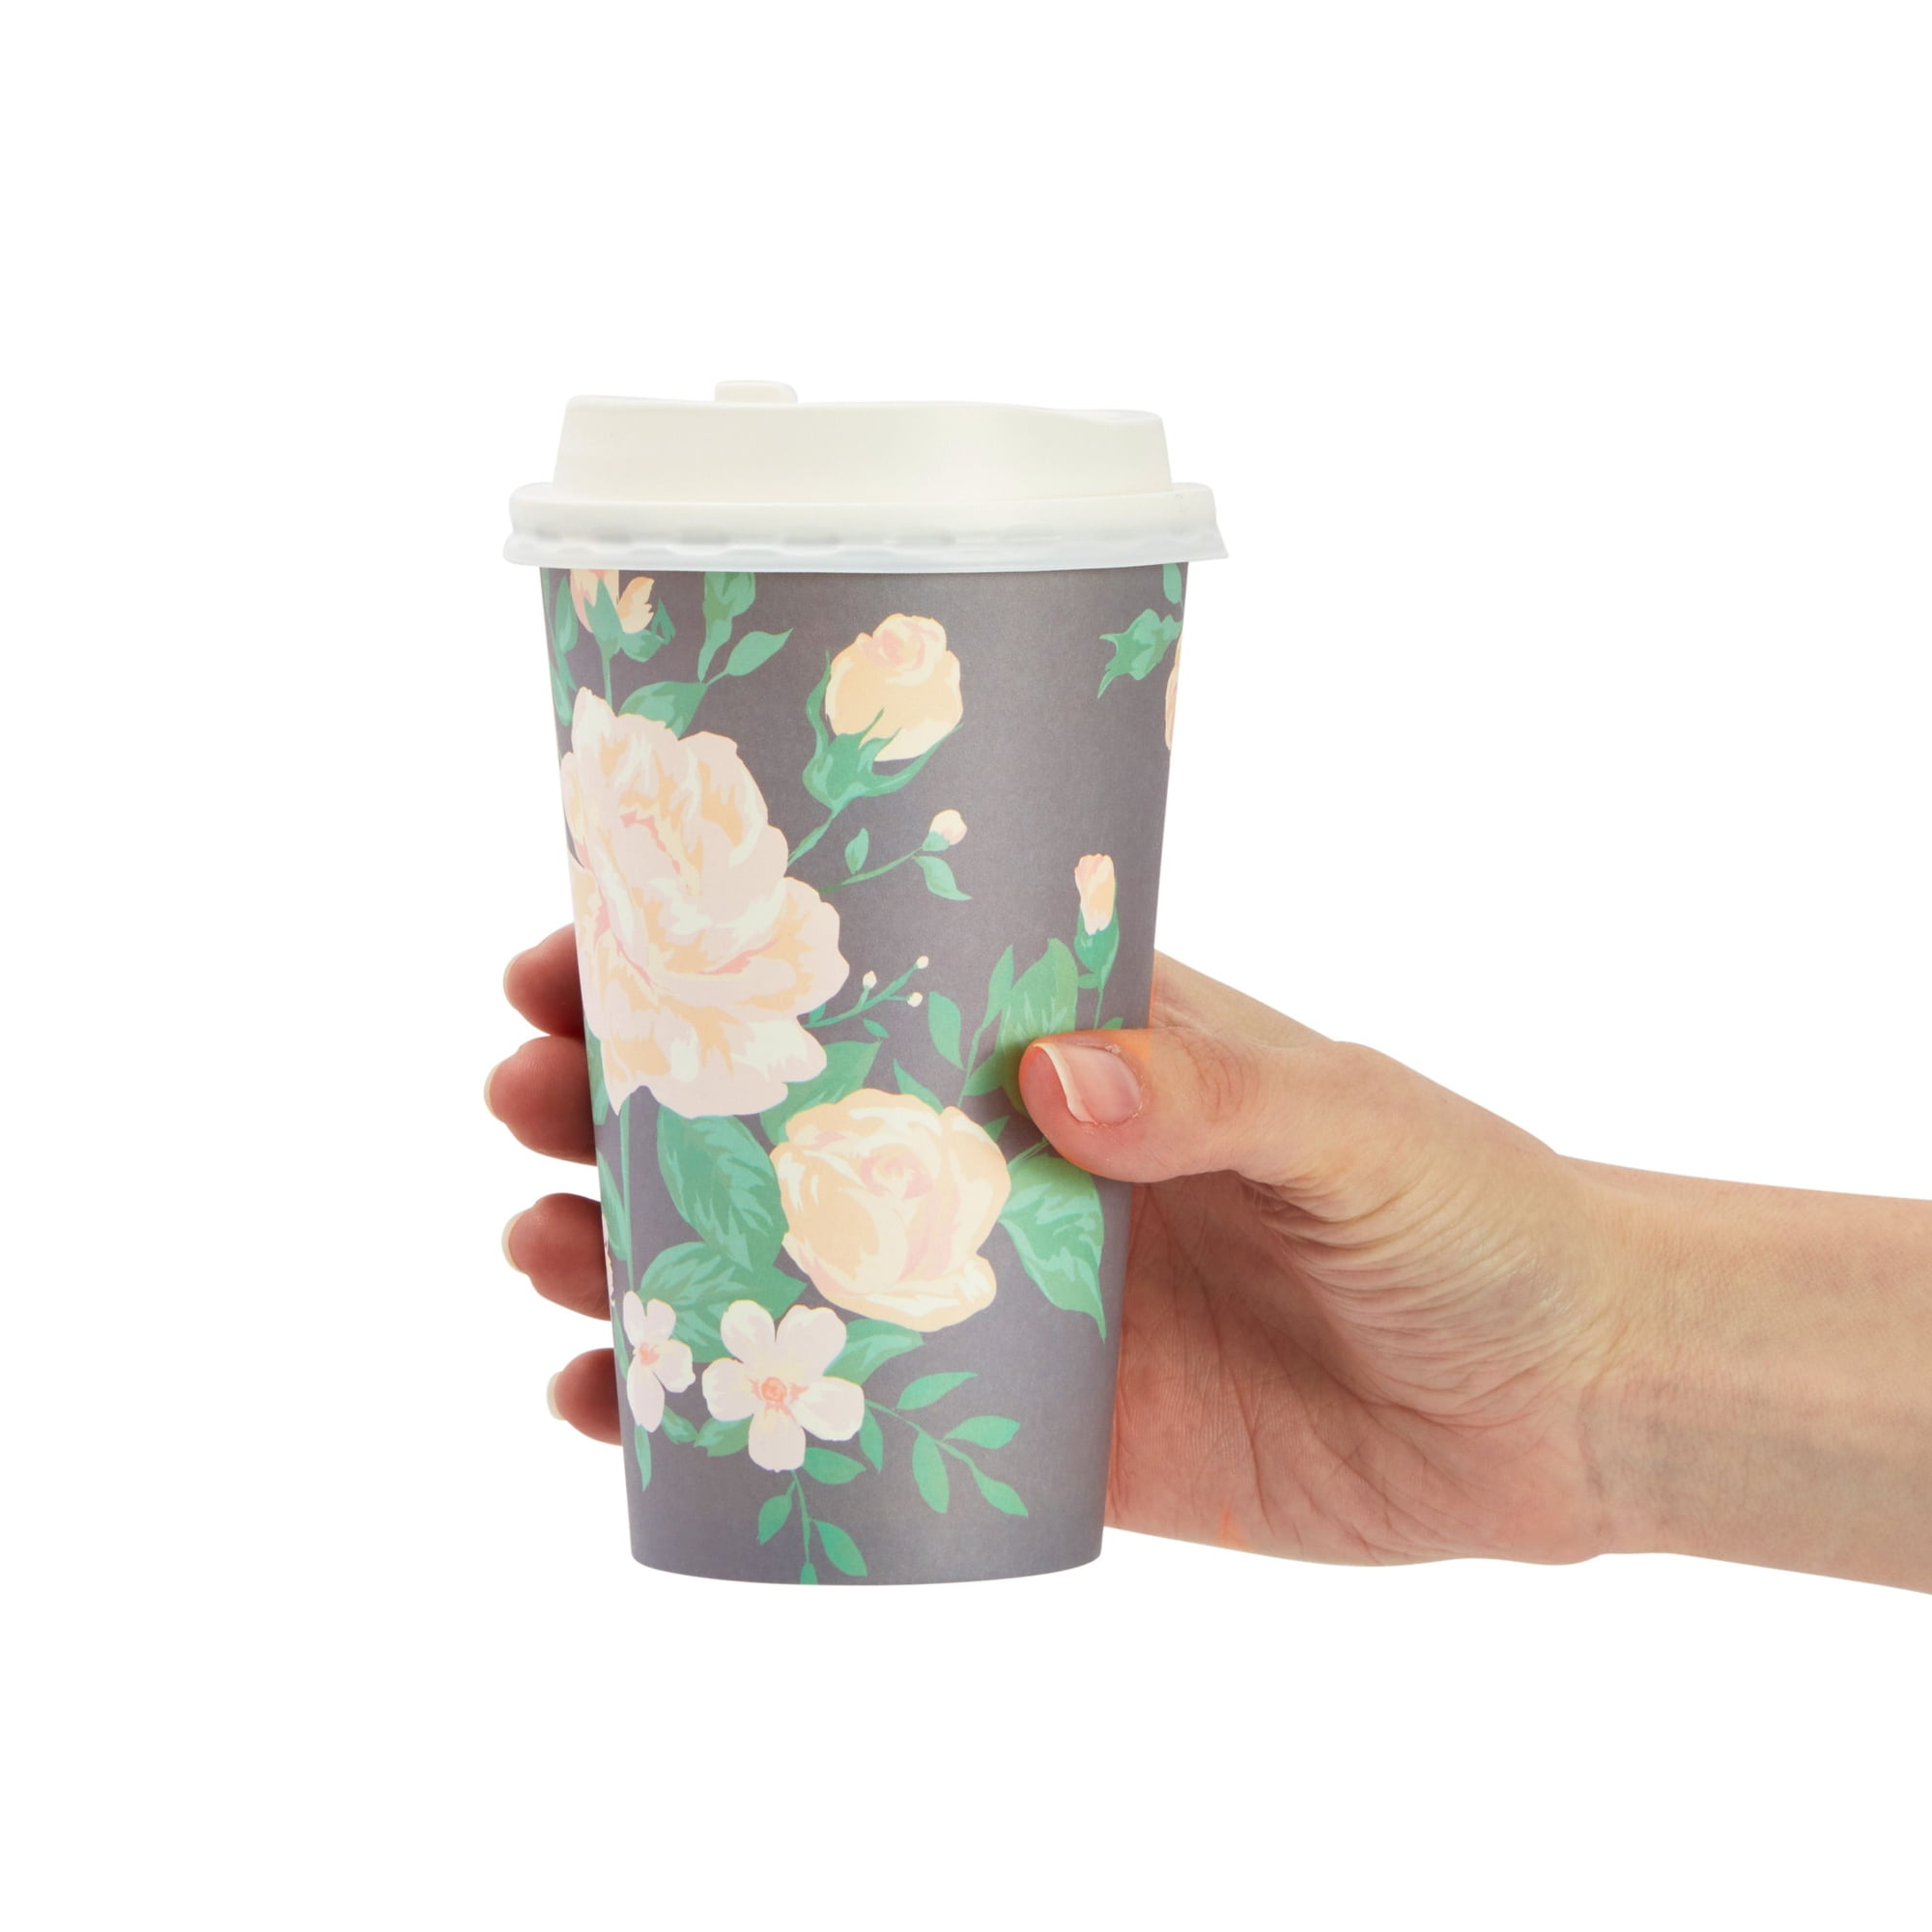 Disposable Coffee Cups With Lids - 16 oz To Go Coffee Cups (80 Set) With  Sleeves and Tight Lids Prev…See more Disposable Coffee Cups With Lids - 16  oz